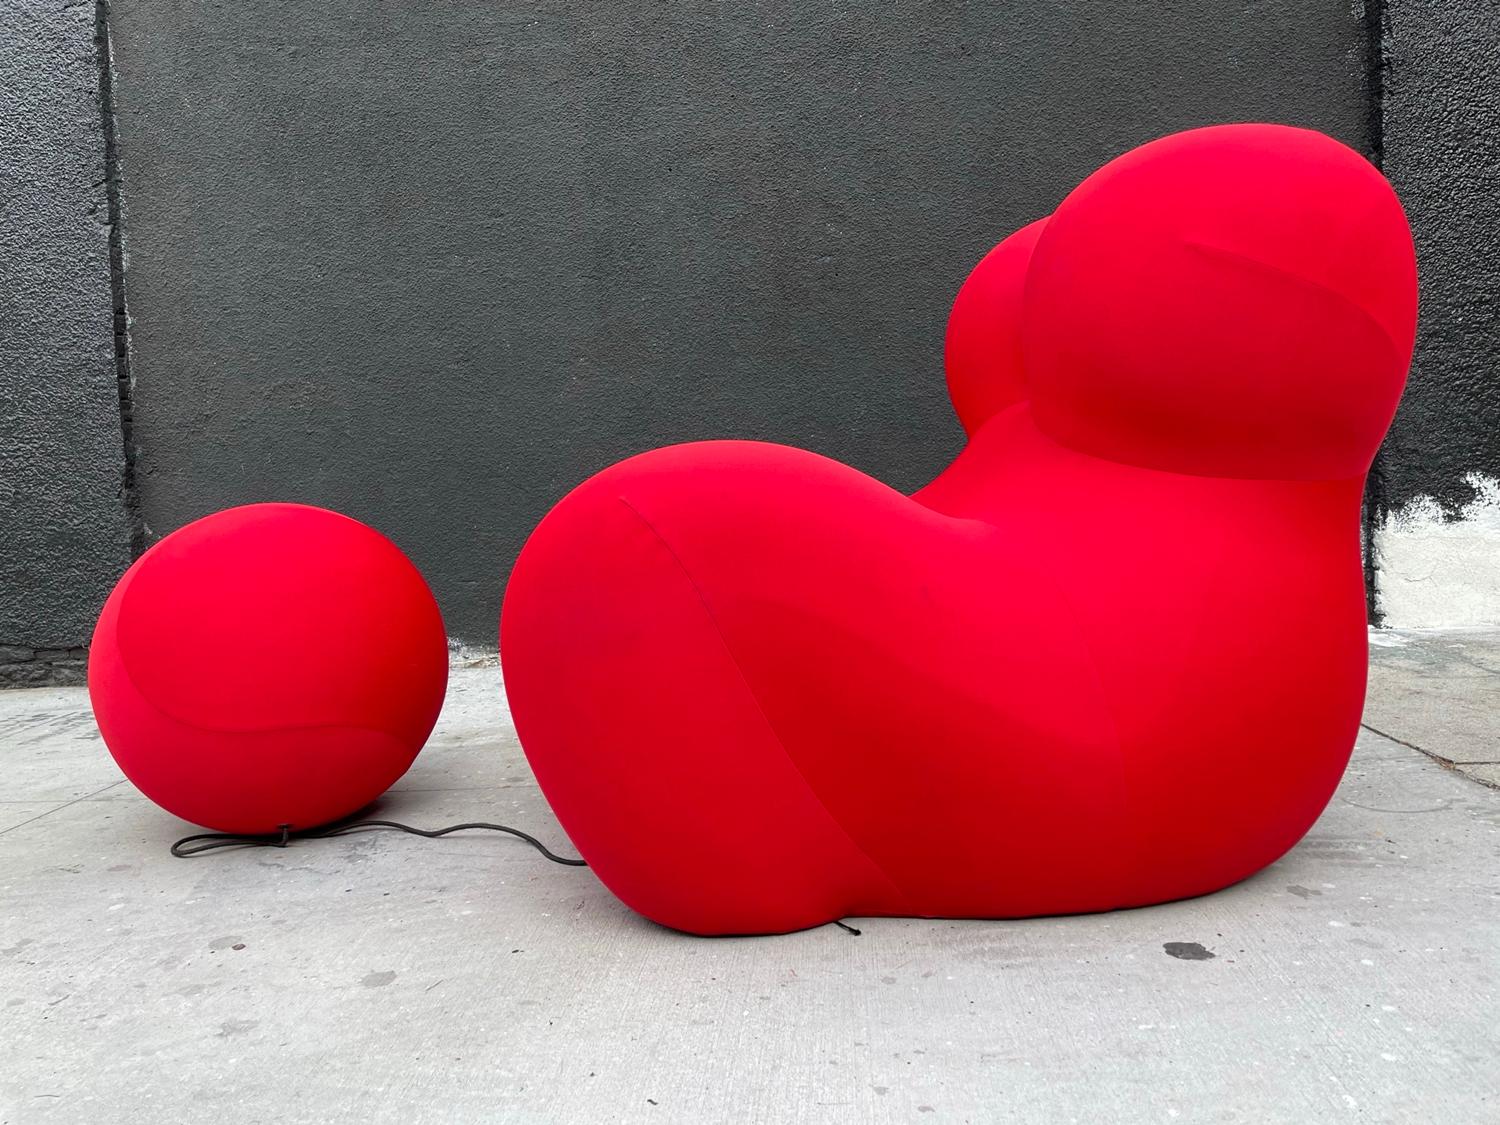 Architect, designer, sculptor and performance artist Gaetano Pesce, whom generally is considered to be inline with the ‘anti-design’ school-of-thought, designed the Up Series in 1969 for B&B Italia. 
His designs express political ideas that were